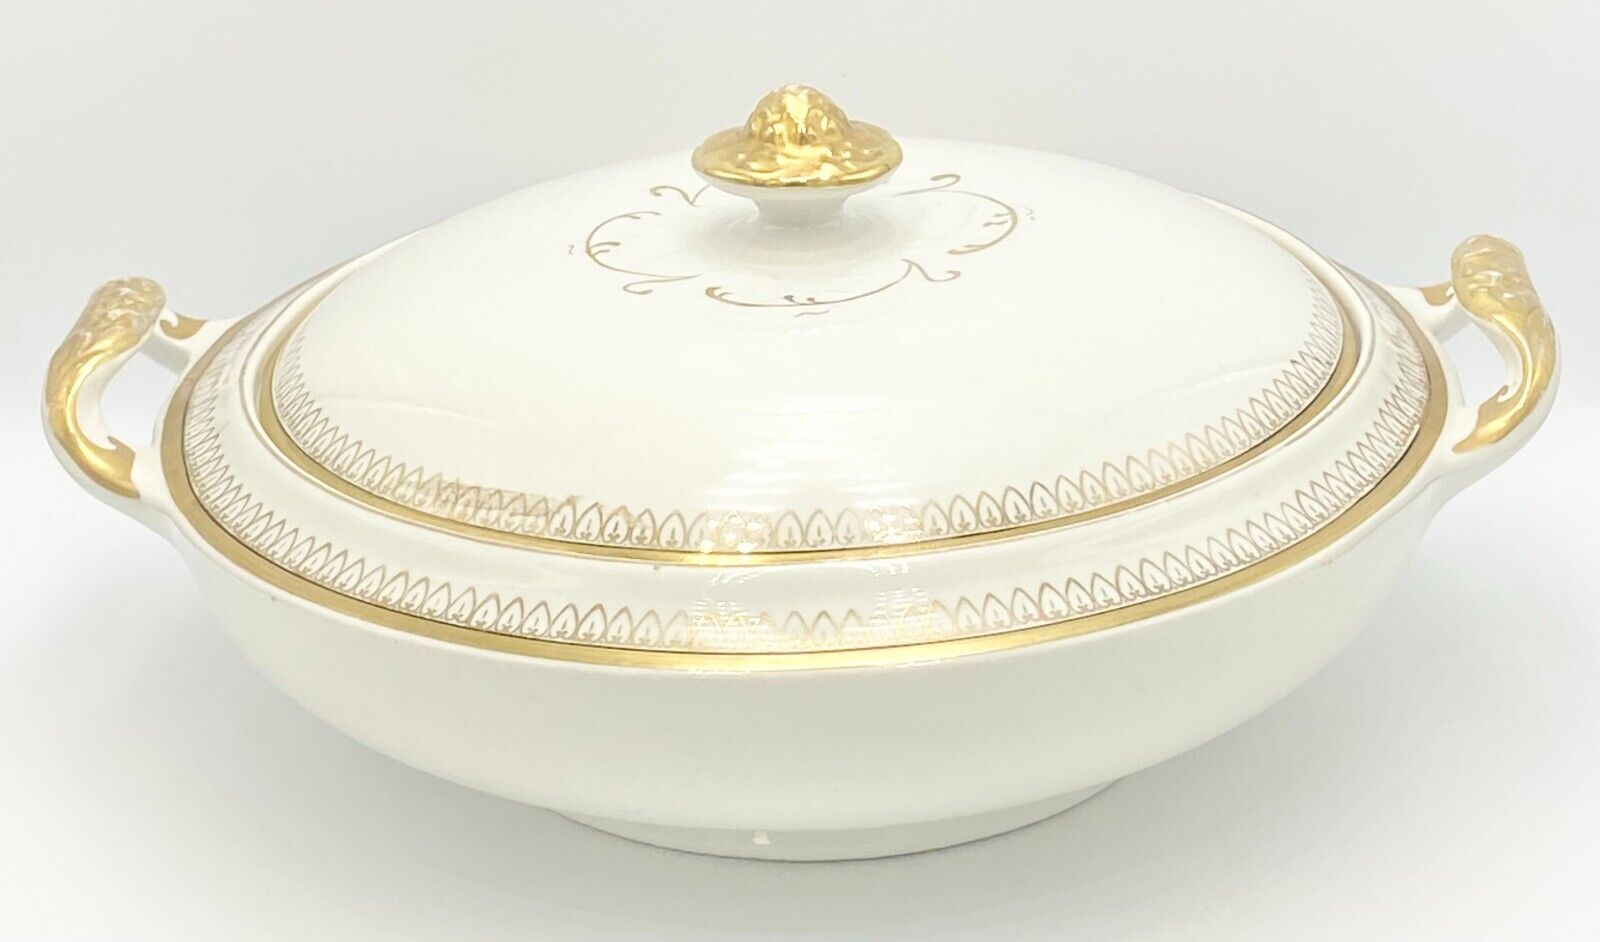 Alfred Meakin England Gold Trim Spades on Border Covered Tureen